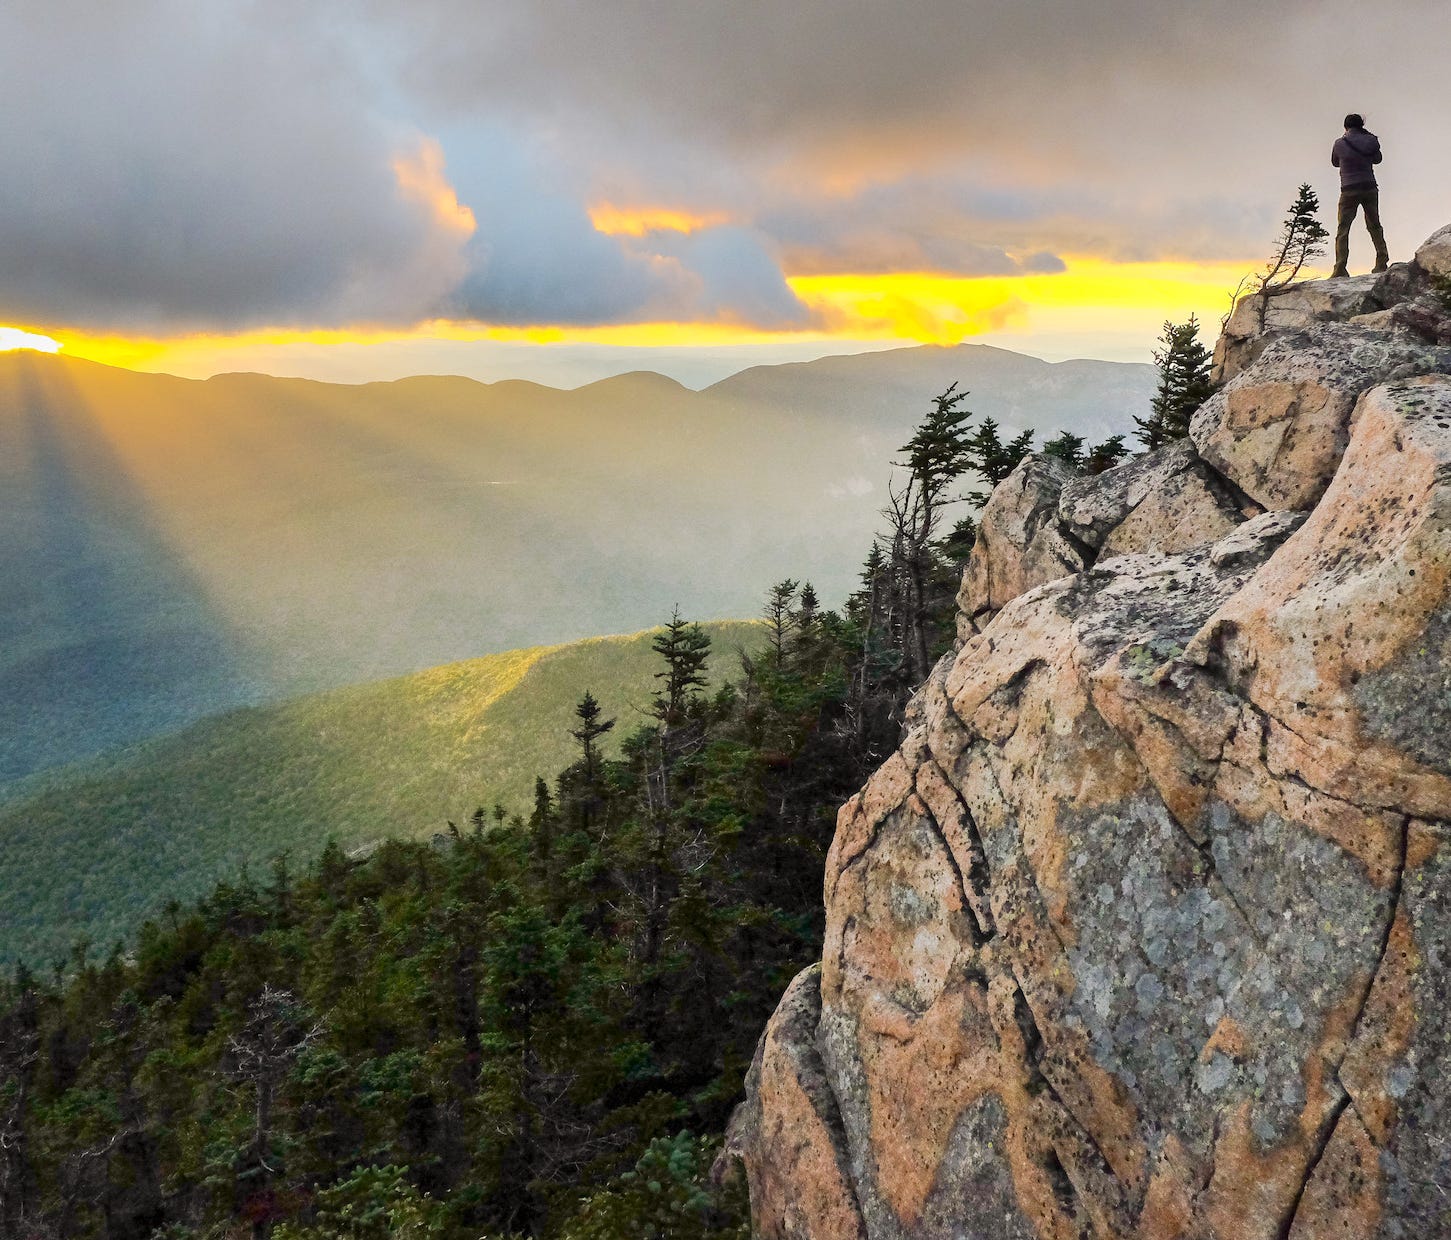 New Hampshire's White Mountains National Forest is another iconic spot along the A.T.